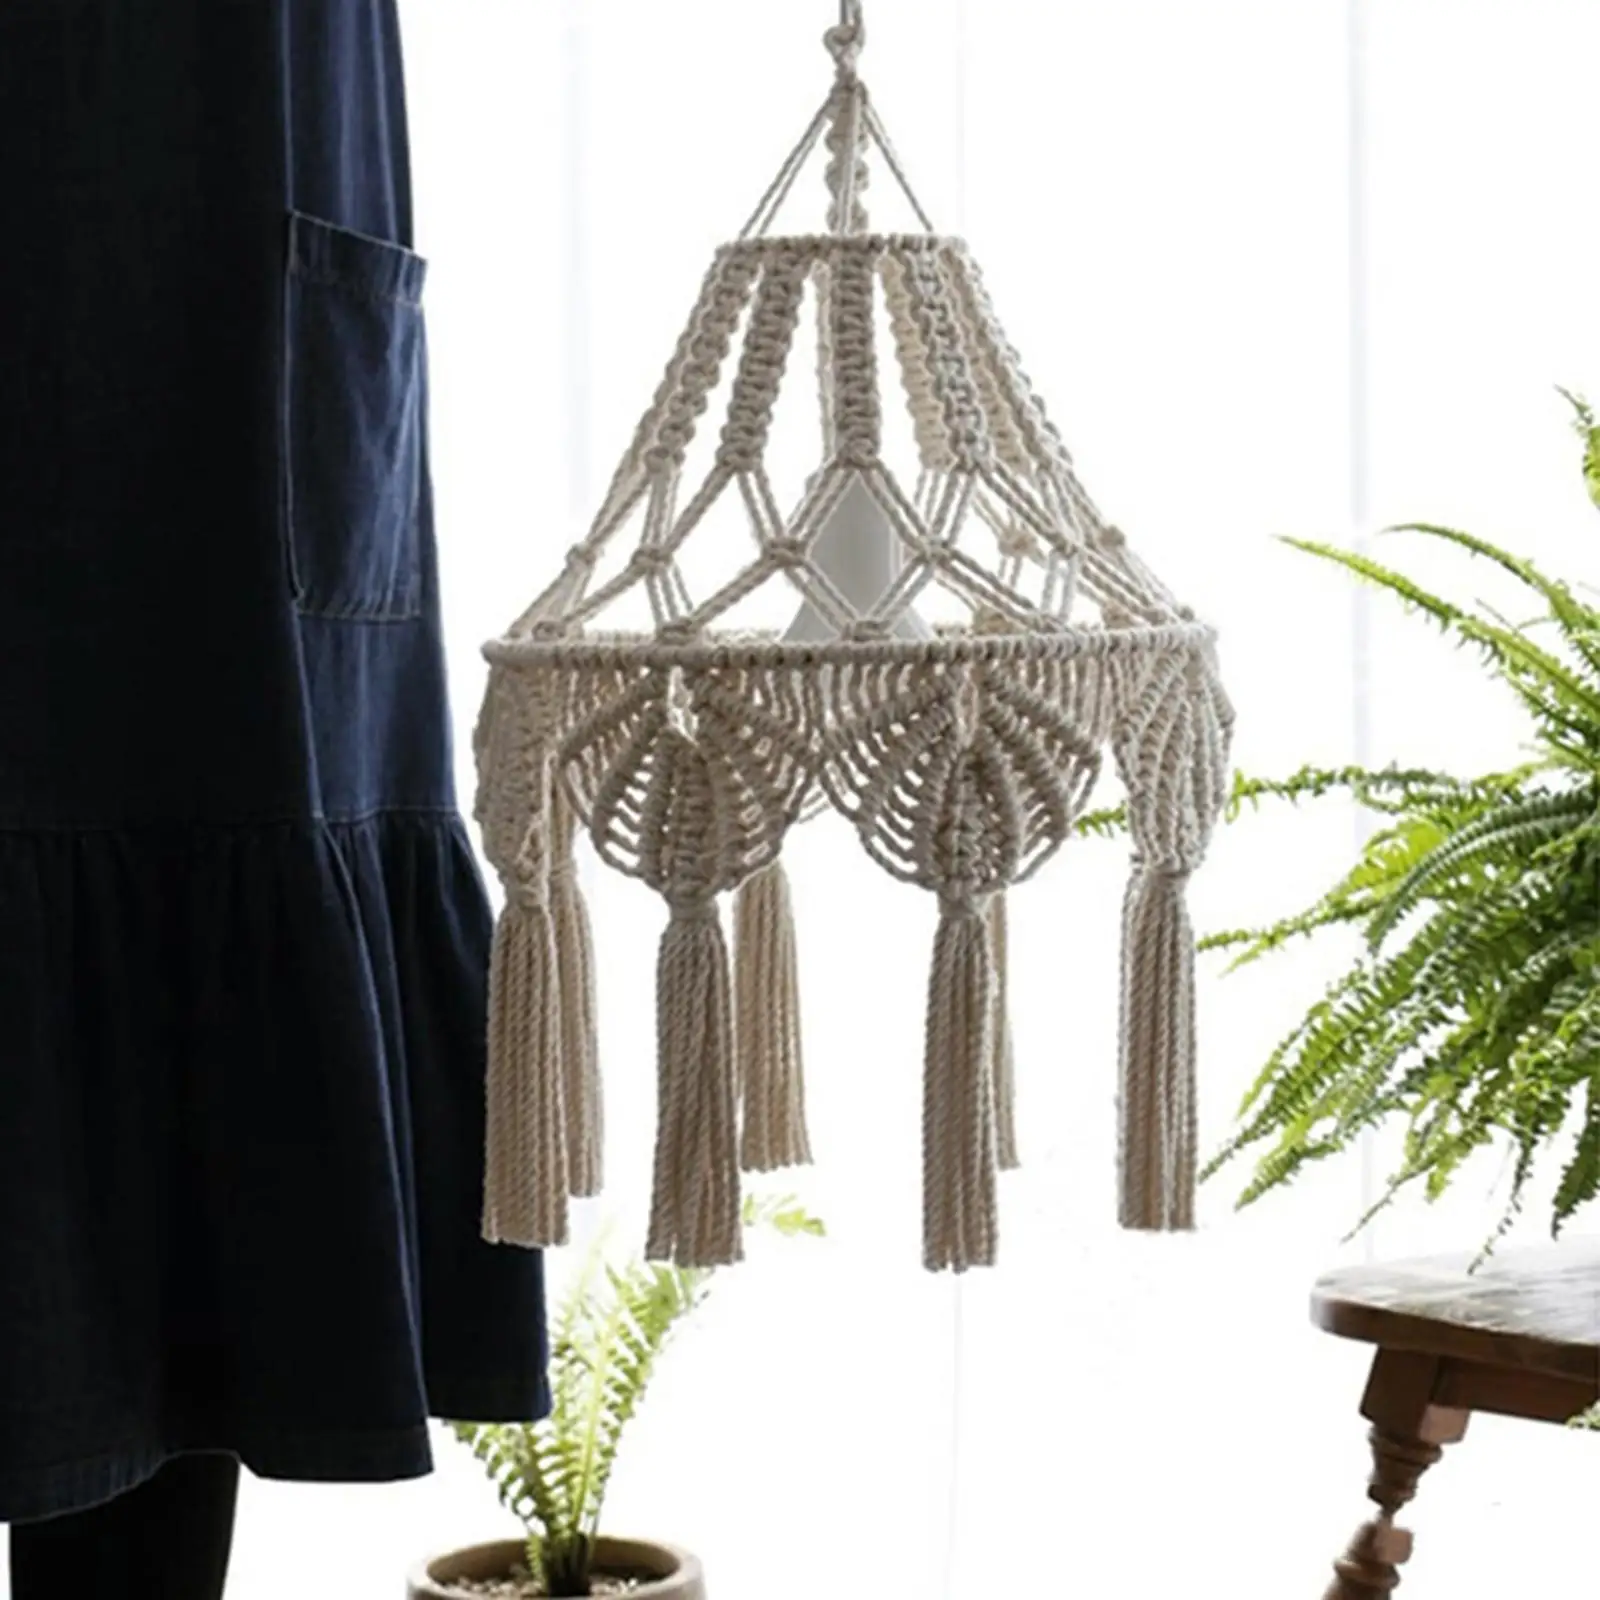 Knitting Macrame Lamp Shade Boho Chandelier Lampshade for Home Wedding Party